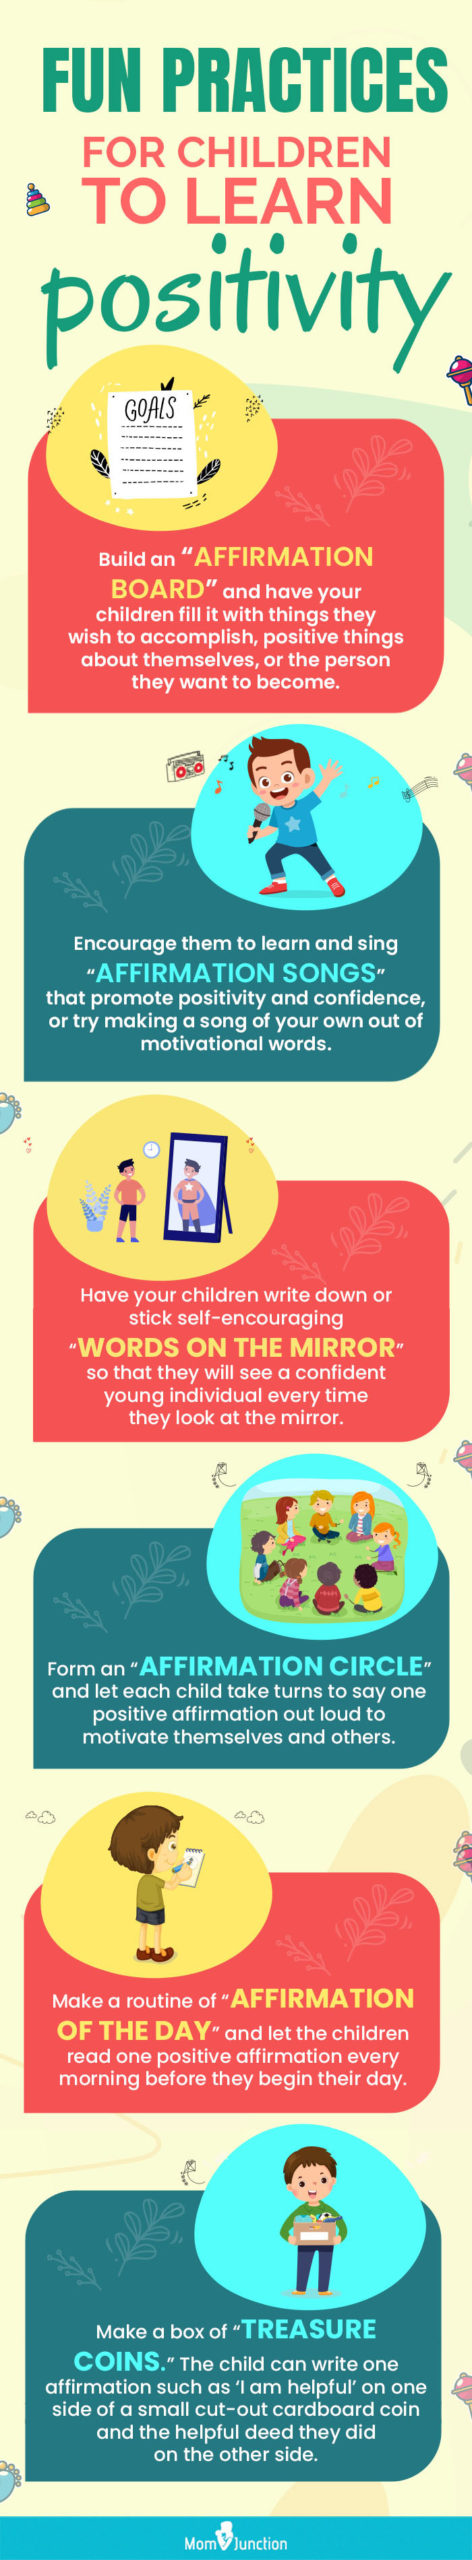 fun practices for children to earn positivity (infographic)